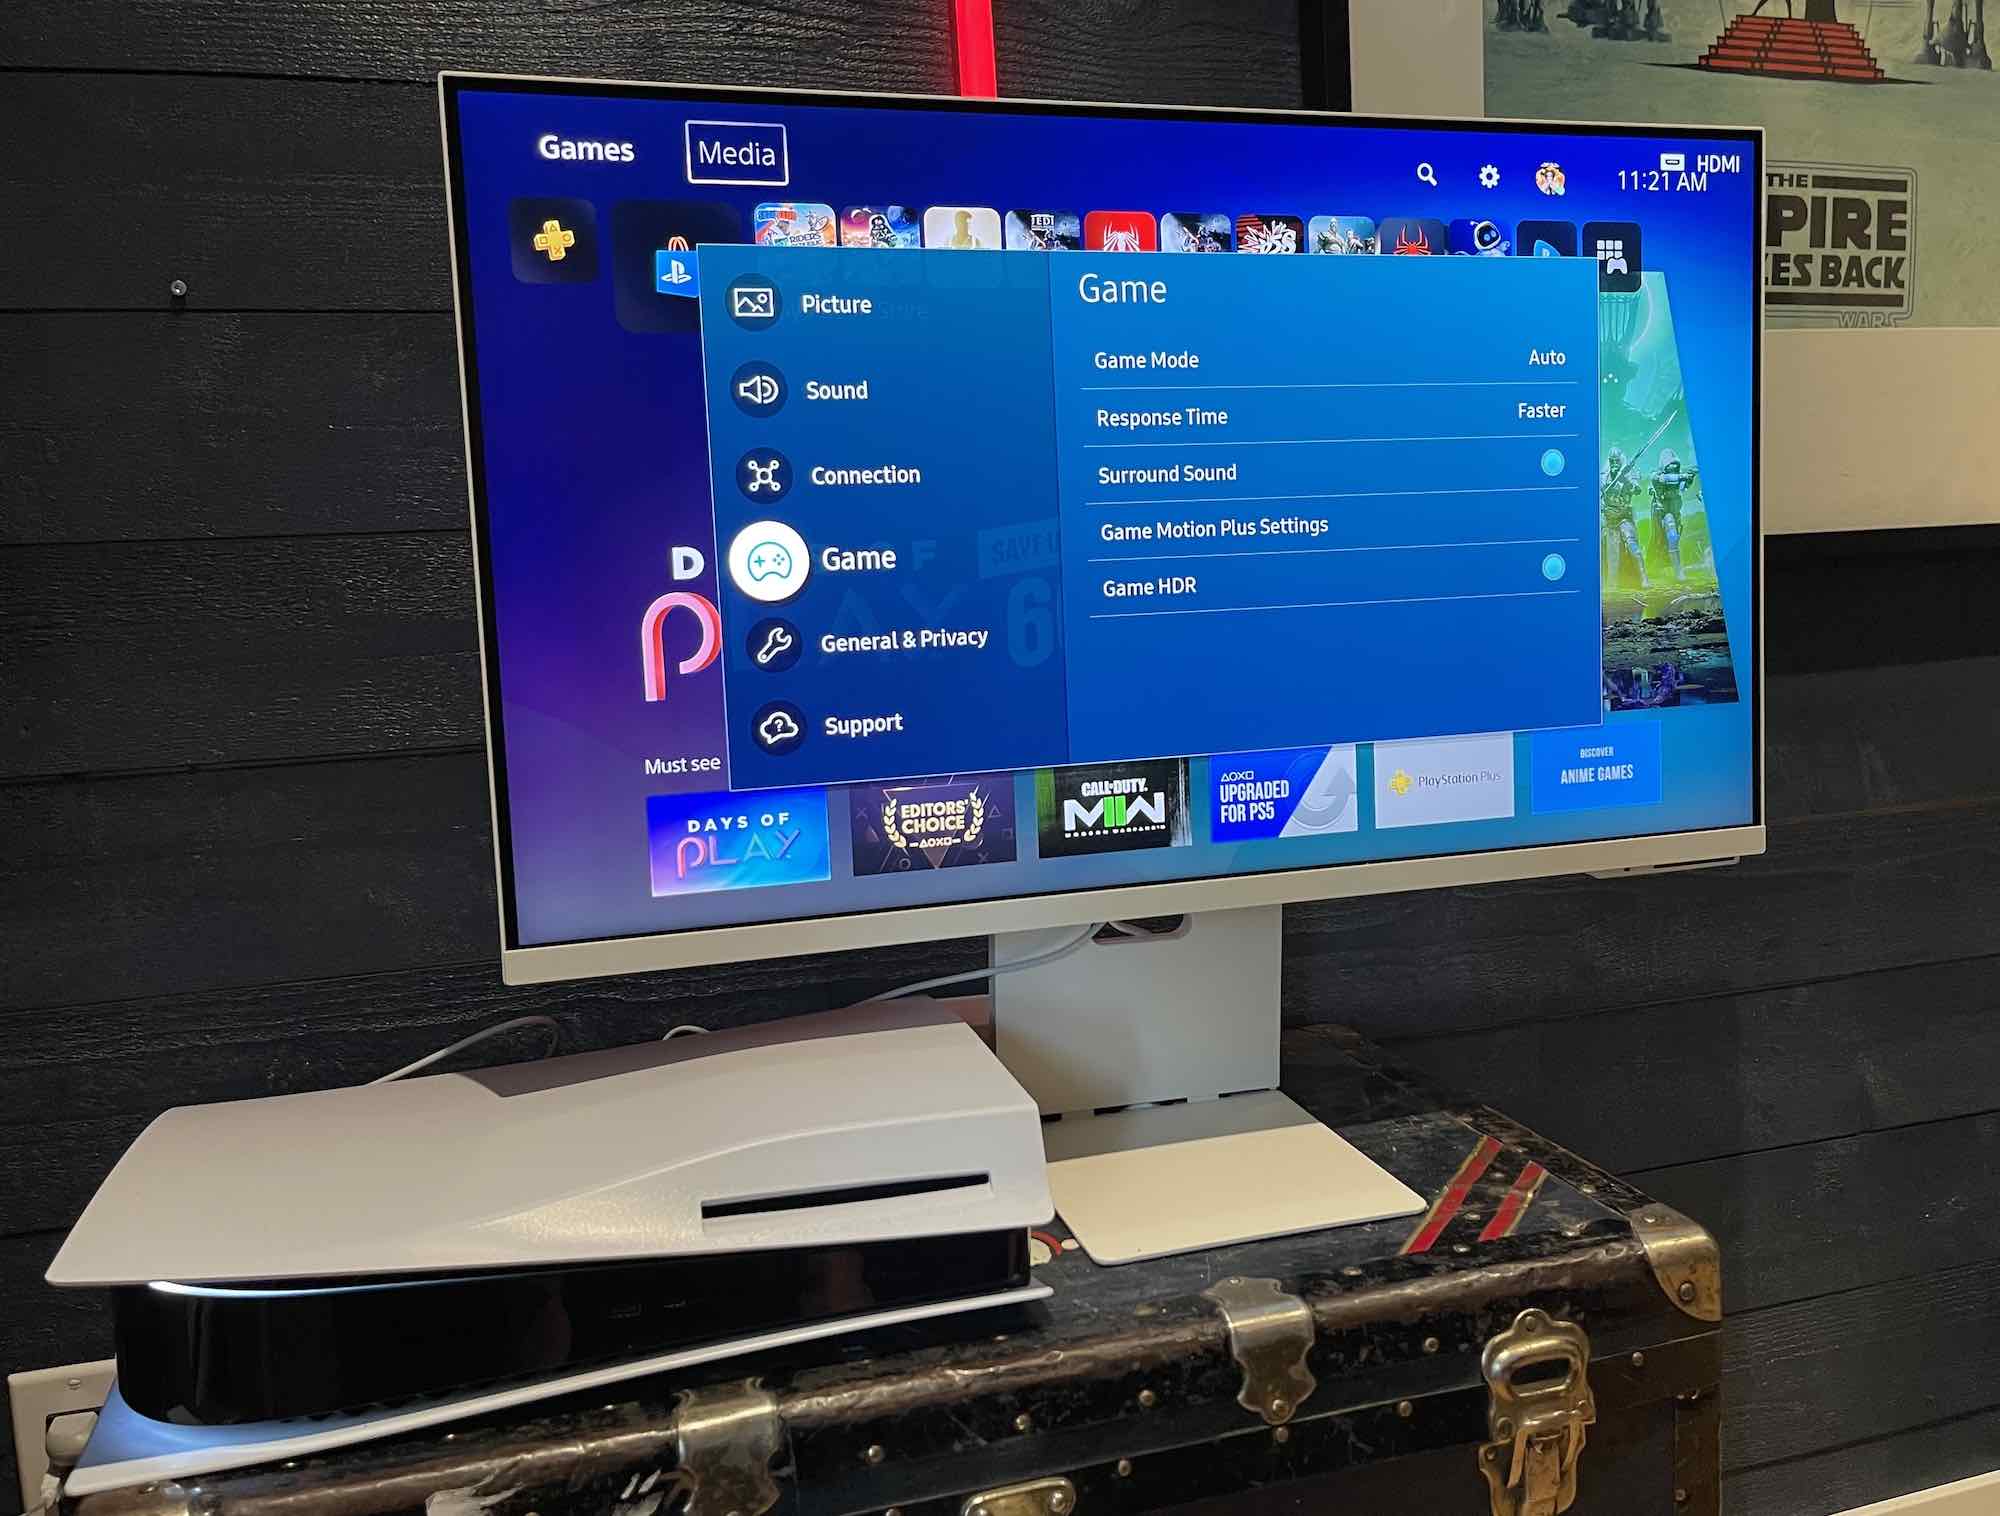 Samsung's Smart Monitor can stream TV apps, supports AirPlay 2 and more -  The Verge